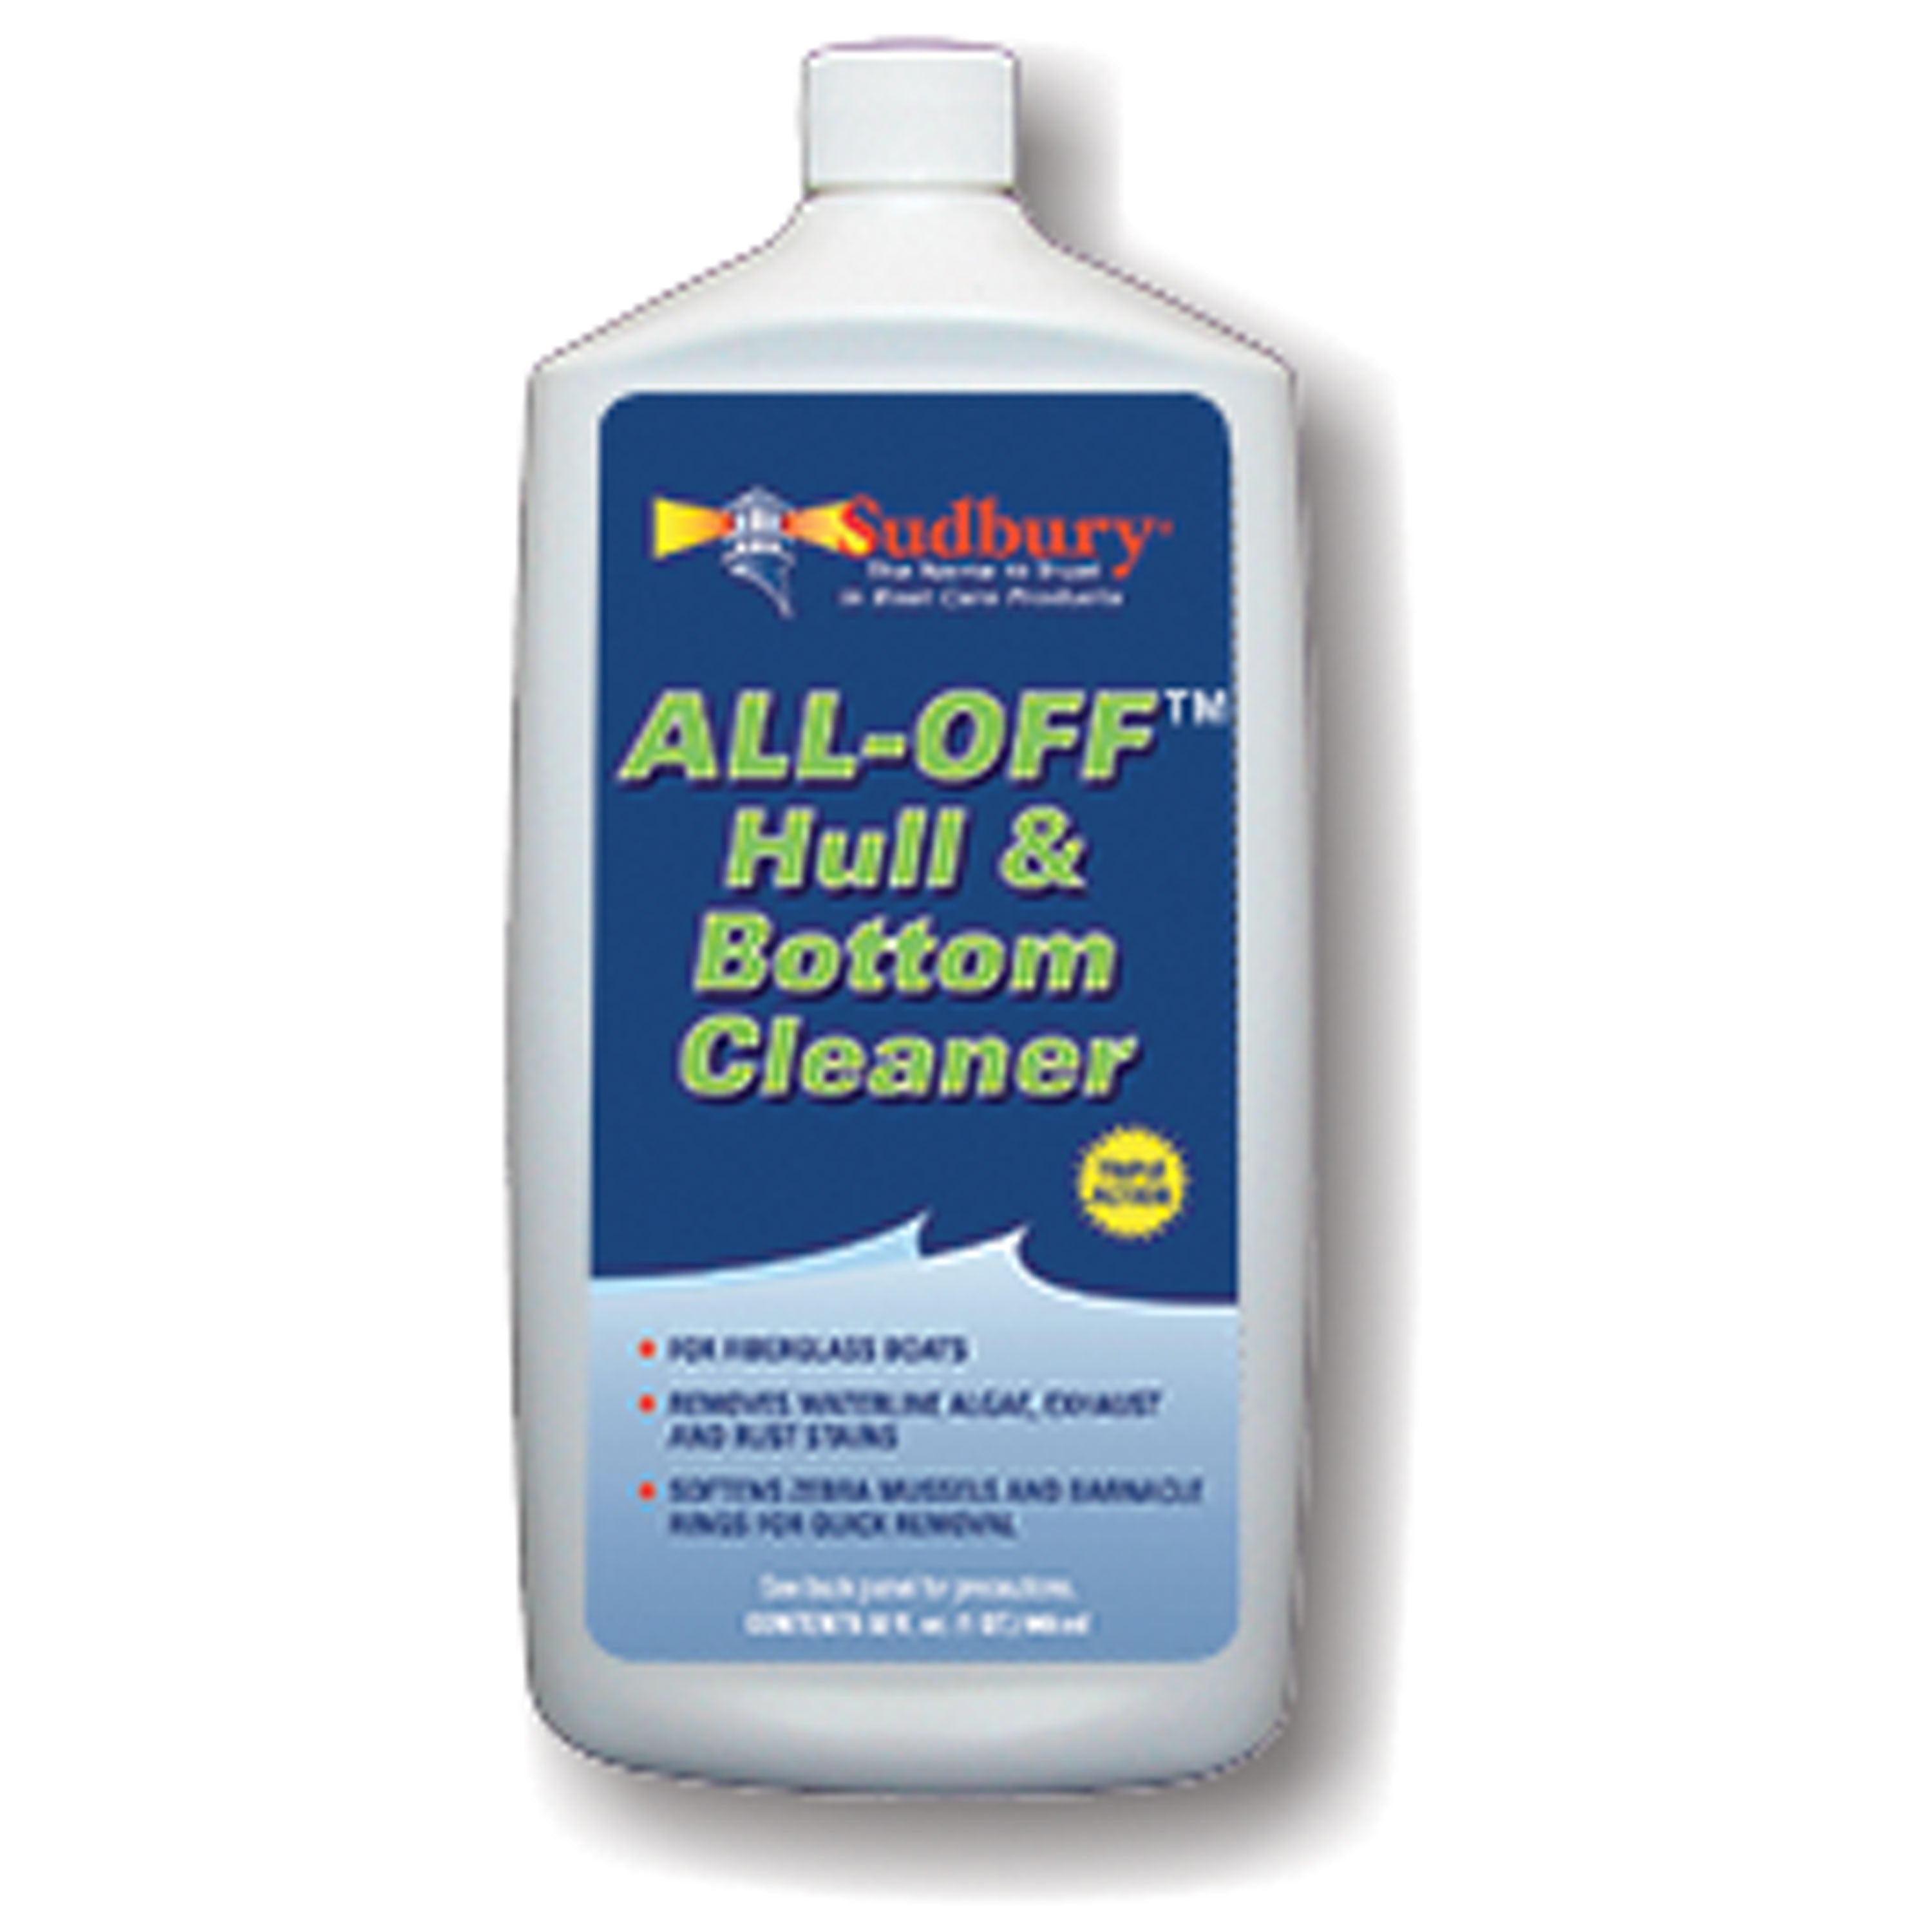 Sudbury 2032 All-Off Hull and Bottom Cleaner - 32 oz.